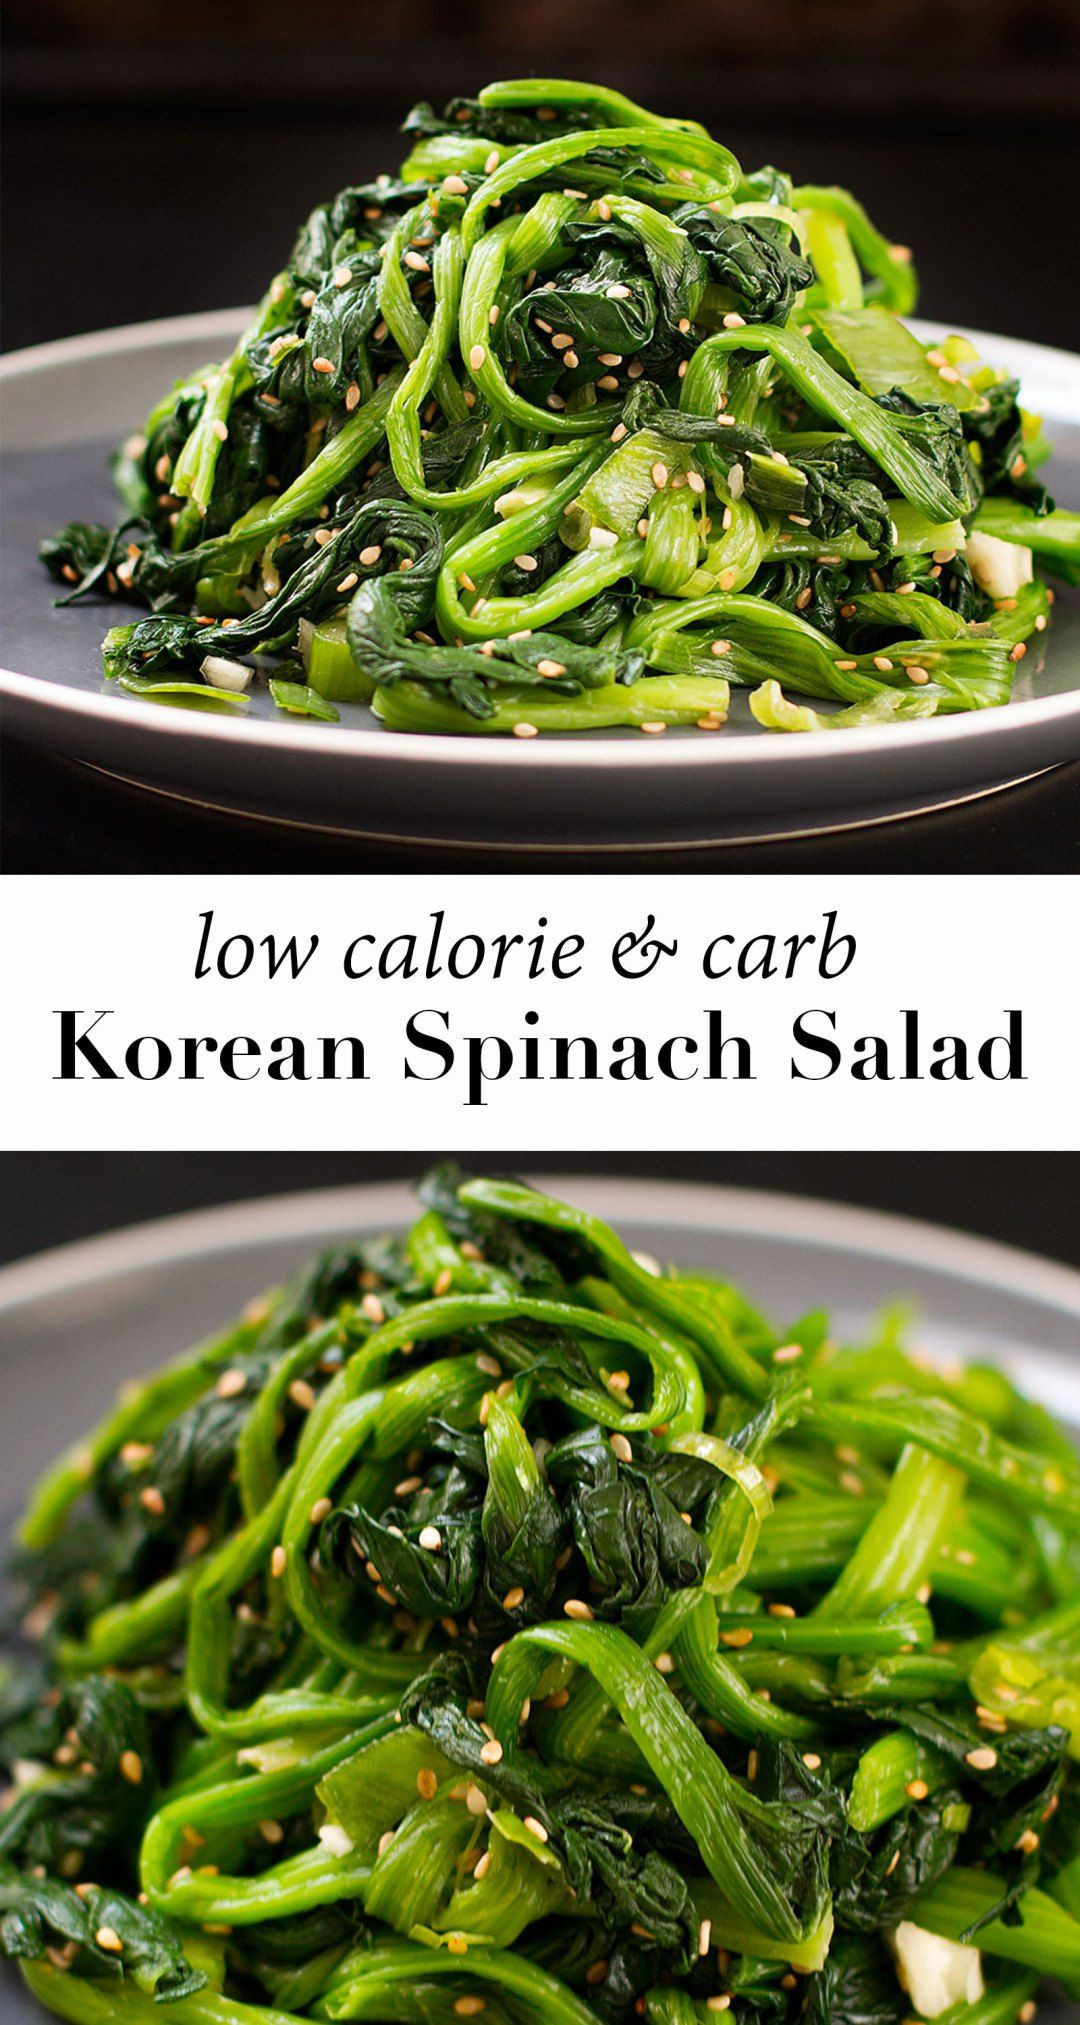 Low Calorie Spinach Recipes
 korean spinach salad recipe Tasty asian salad recipe with